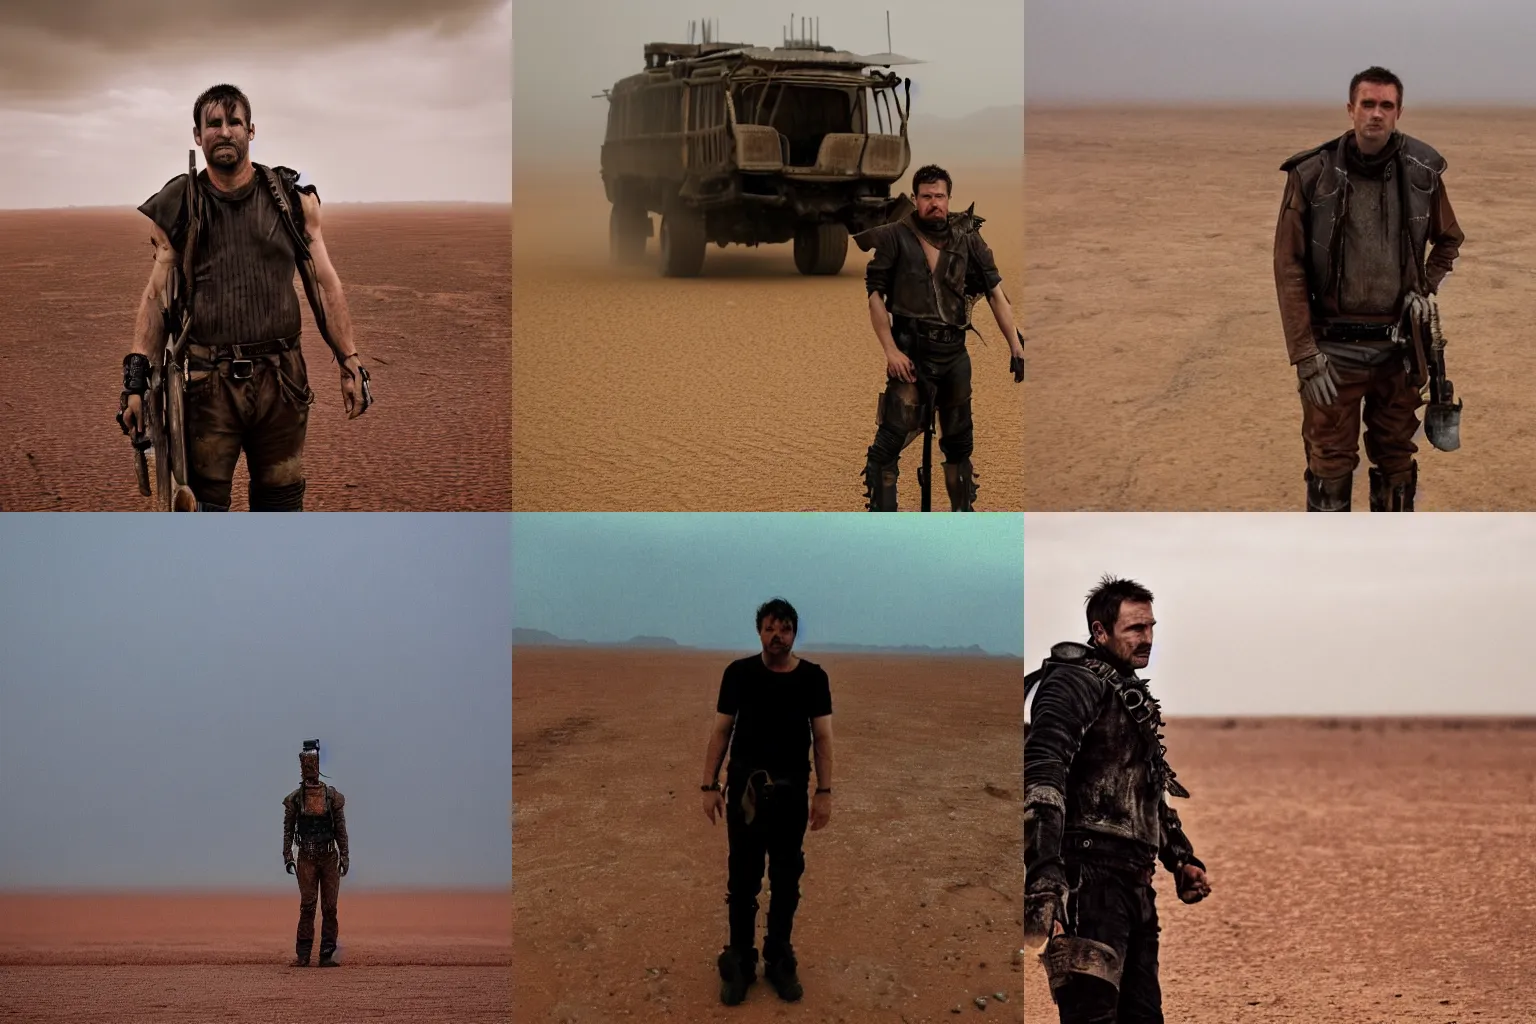 Prompt: mad max standing alone in a desert during monsoon season